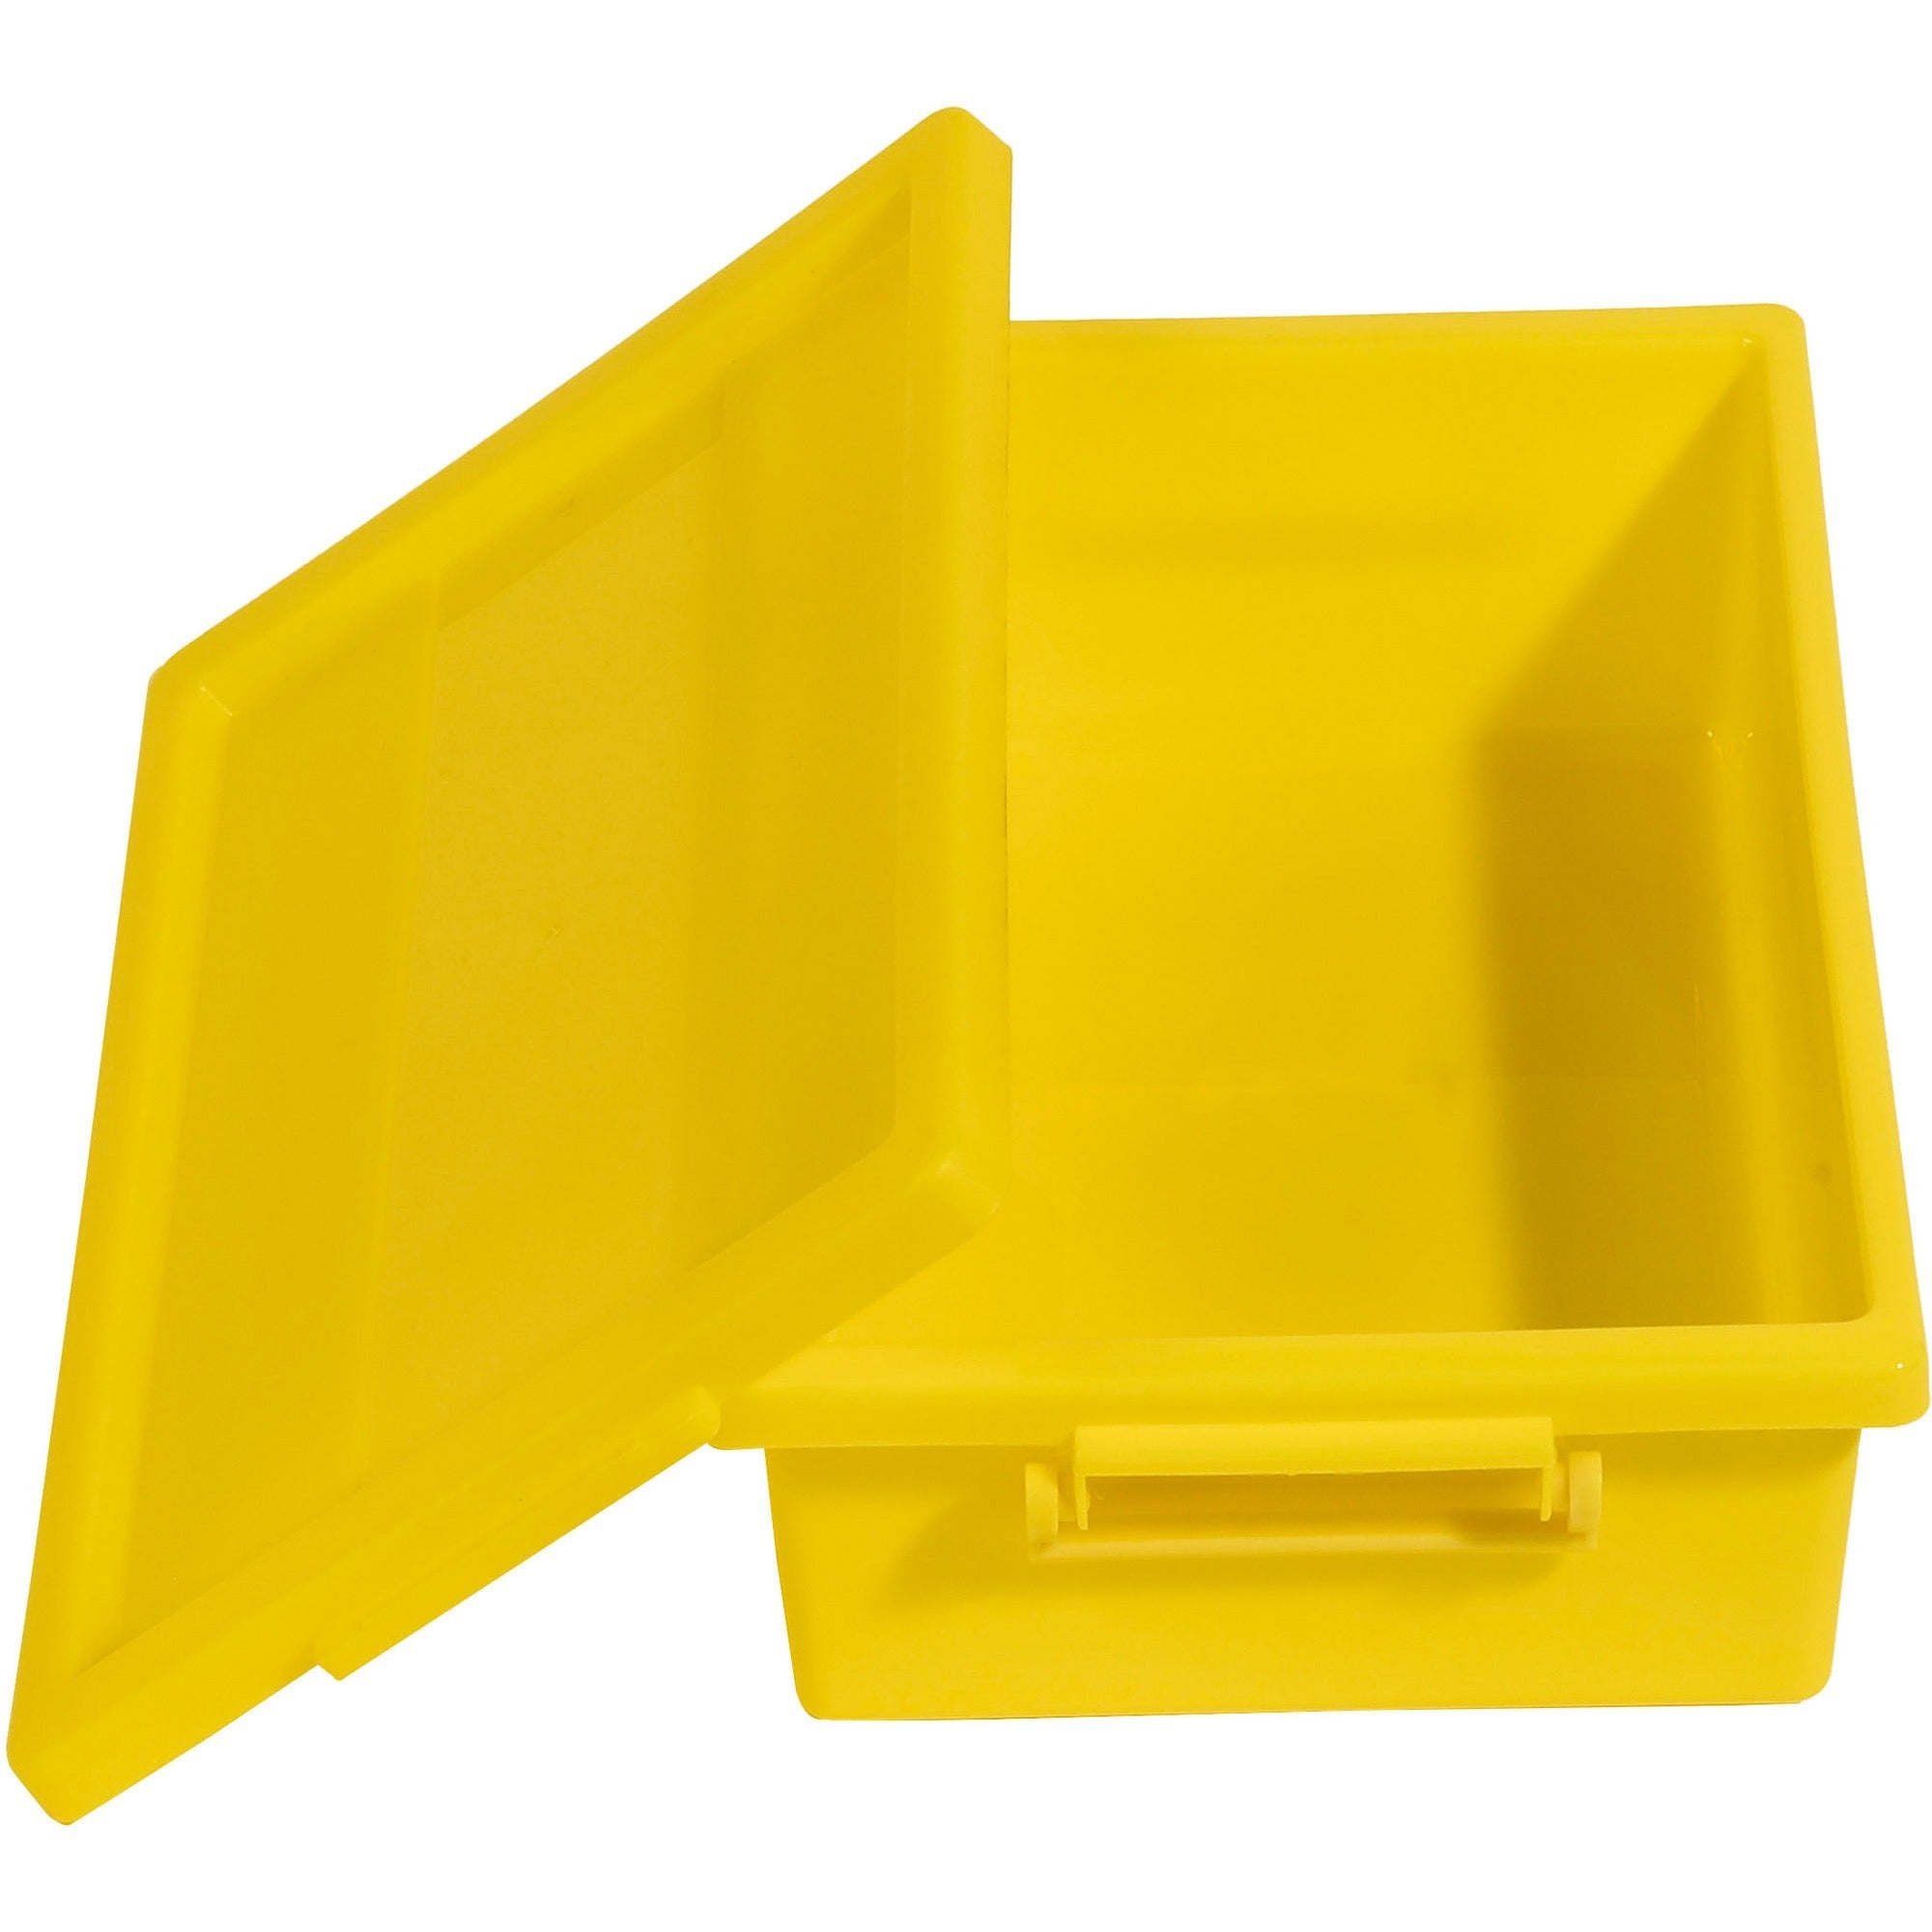 deflecto-little-artist-antimicrobial-storage-tote-31-height-x-119-width-x-68-depth-antimicrobial-lightweight-mold-resistant-mildew-resistant-handle-portable-stackable-durable-spill-resistant-easy-to-clean-yellow-polypropylene-_def39513yel - 1